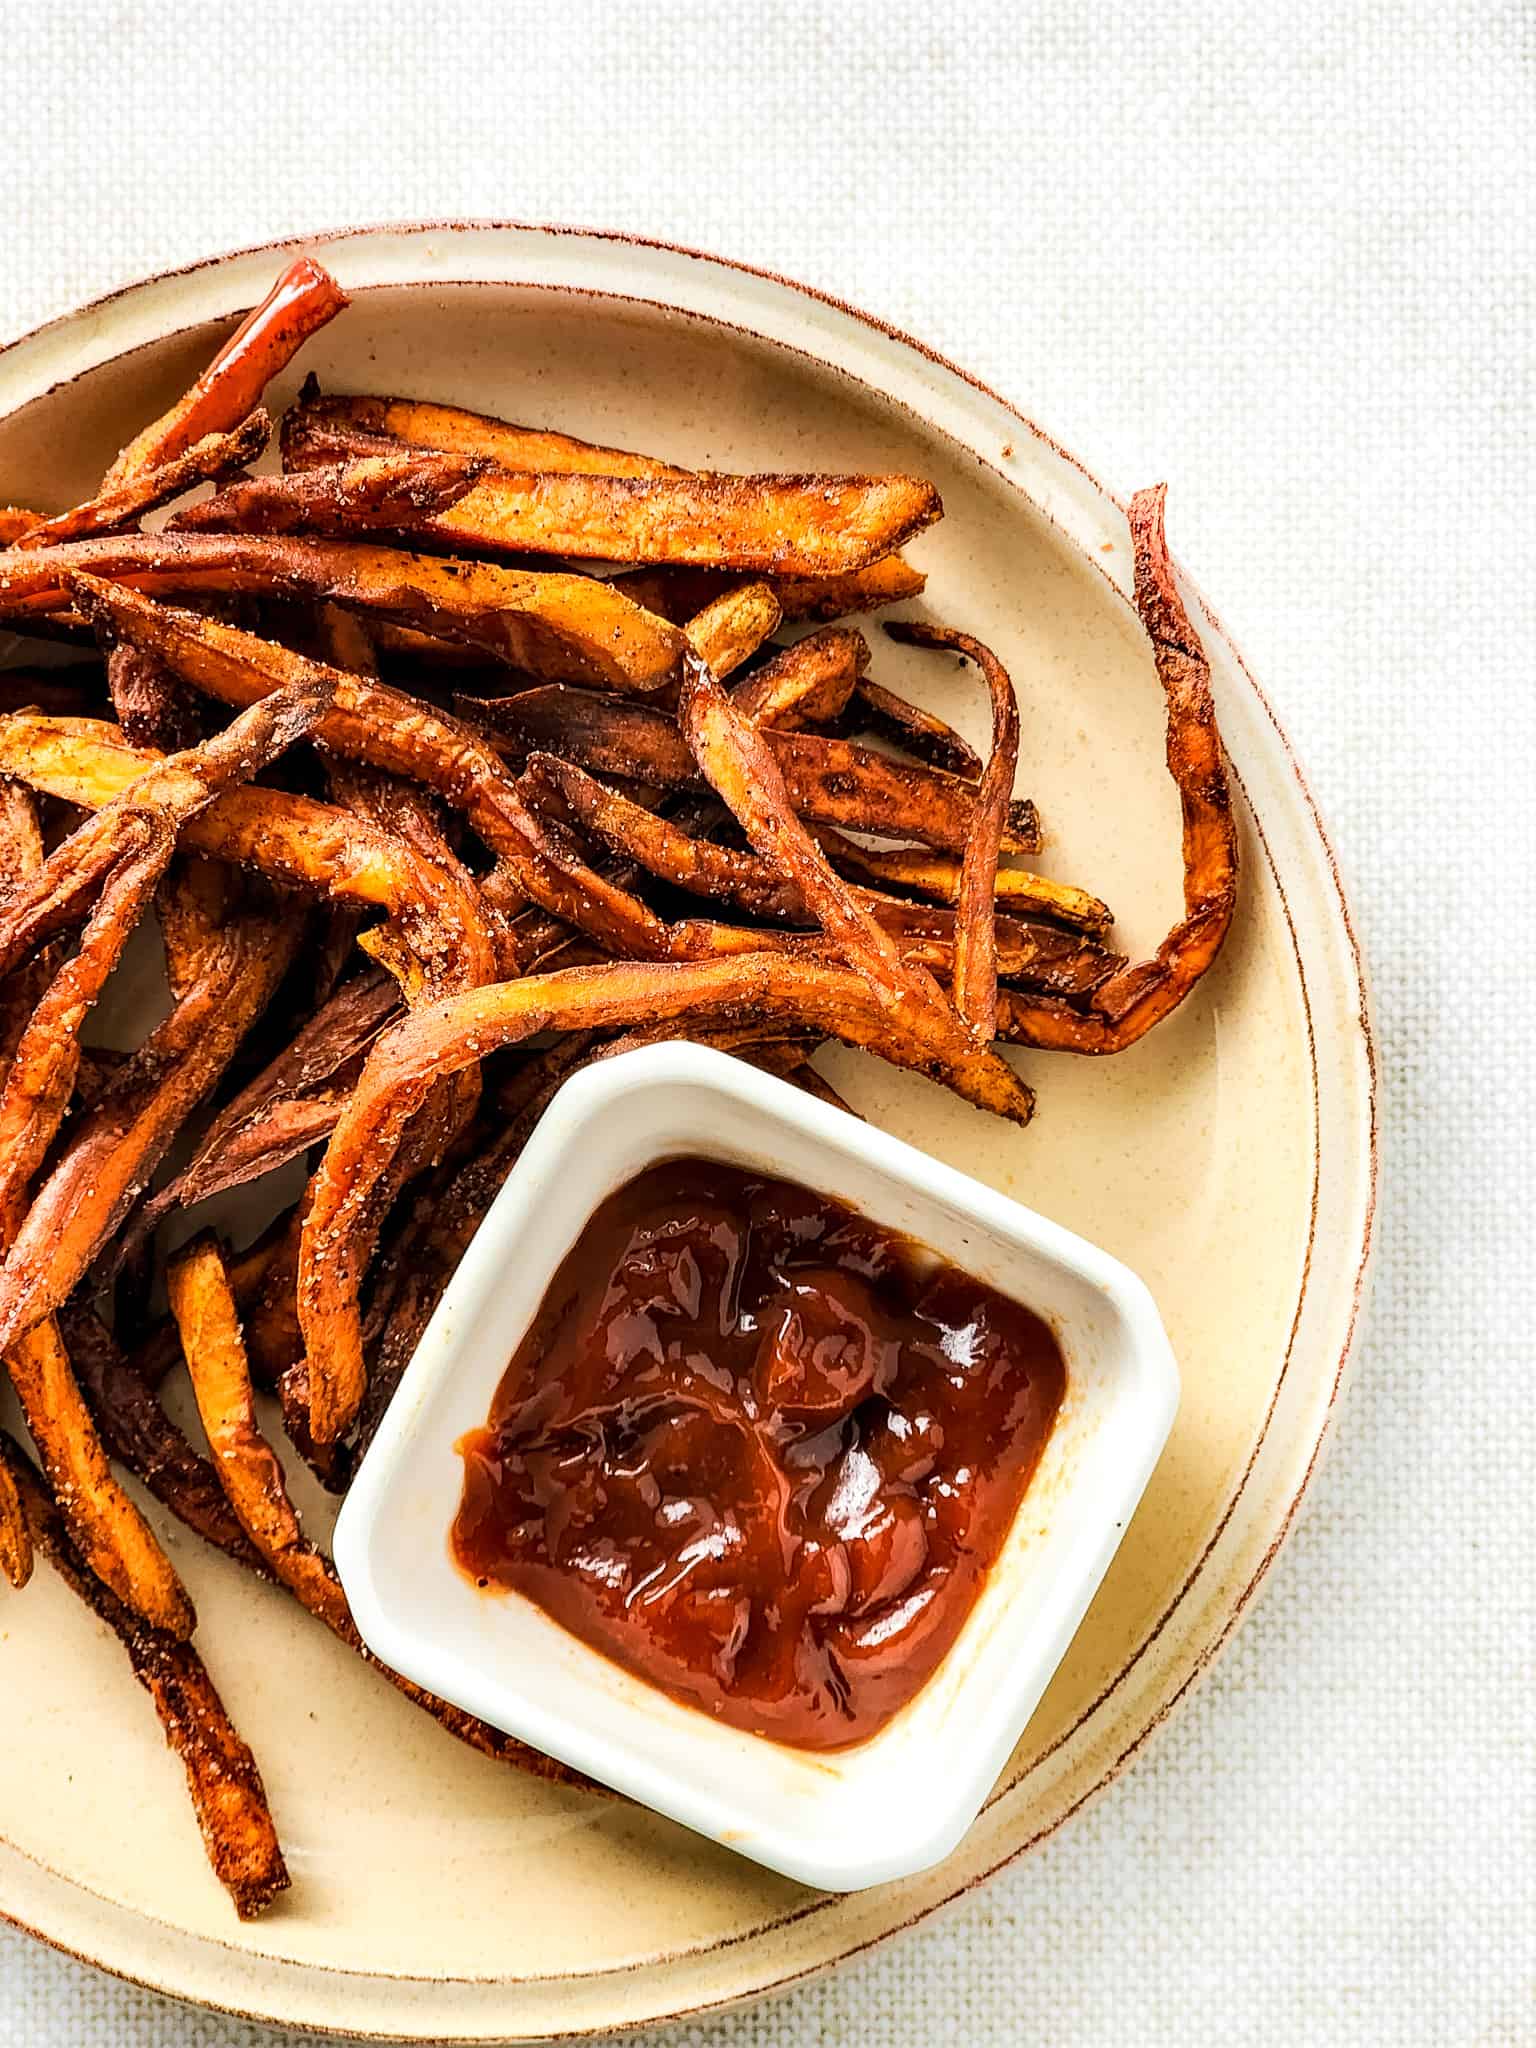 Top down view of a plate of sweet potato fries and ketchup.